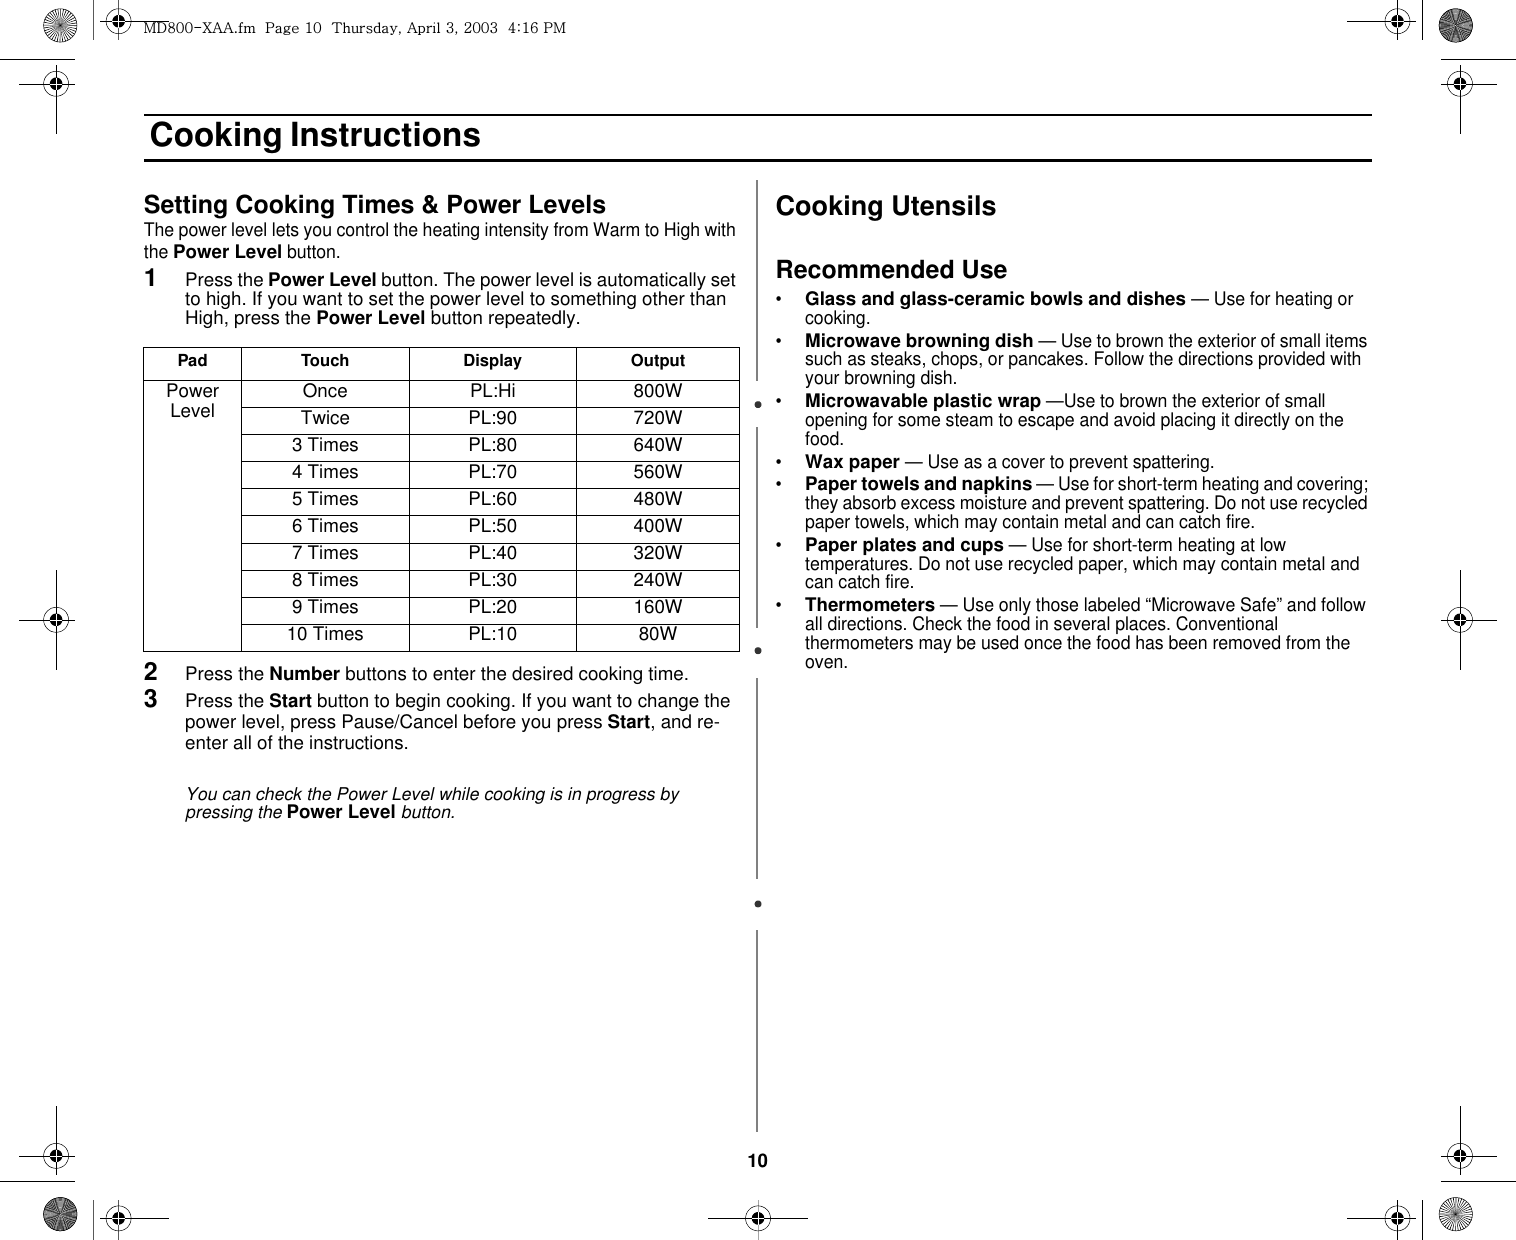 10 Cooking InstructionsSetting Cooking Times &amp; Power LevelsThe power level lets you control the heating intensity from Warm to High with the Power Level button.1Press the Power Level button. The power level is automatically set to high. If you want to set the power level to something other than High, press the Power Level button repeatedly.      2Press the Number buttons to enter the desired cooking time.3Press the Start button to begin cooking. If you want to change the power level, press Pause/Cancel before you press Start, and re-enter all of the instructions.You can check the Power Level while cooking is in progress by pressing the Power Level button.Cooking UtensilsRecommended Use•Glass and glass-ceramic bowls and dishes — Use for heating or cooking. •Microwave browning dish — Use to brown the exterior of small items such as steaks, chops, or pancakes. Follow the directions provided with your browning dish.•Microwavable plastic wrap —Use to brown the exterior of small  opening for some steam to escape and avoid placing it directly on the food. •Wax paper — Use as a cover to prevent spattering. •Paper towels and napkins — Use for short-term heating and covering; they absorb excess moisture and prevent spattering. Do not use recycled paper towels, which may contain metal and can catch fire. •Paper plates and cups — Use for short-term heating at low temperatures. Do not use recycled paper, which may contain metal and can catch fire. •Thermometers — Use only those labeled “Microwave Safe” and follow all directions. Check the food in several places. Conventional thermometers may be used once the food has been removed from the oven. Pad Touch Display OutputPower Level Once PL:Hi 800WTwice PL:90 720W3 Times PL:80 640W4 Times PL:70 560W5 Times PL:60 480W6 Times PL:50 400W7 Times PL:40 320W8 Times PL:30 240W9 Times PL:20 160W10 Times PL:10 80Wtk_WWThhUGGwGXWGG{SGhGZSGYWWZGG[aX]Gwt